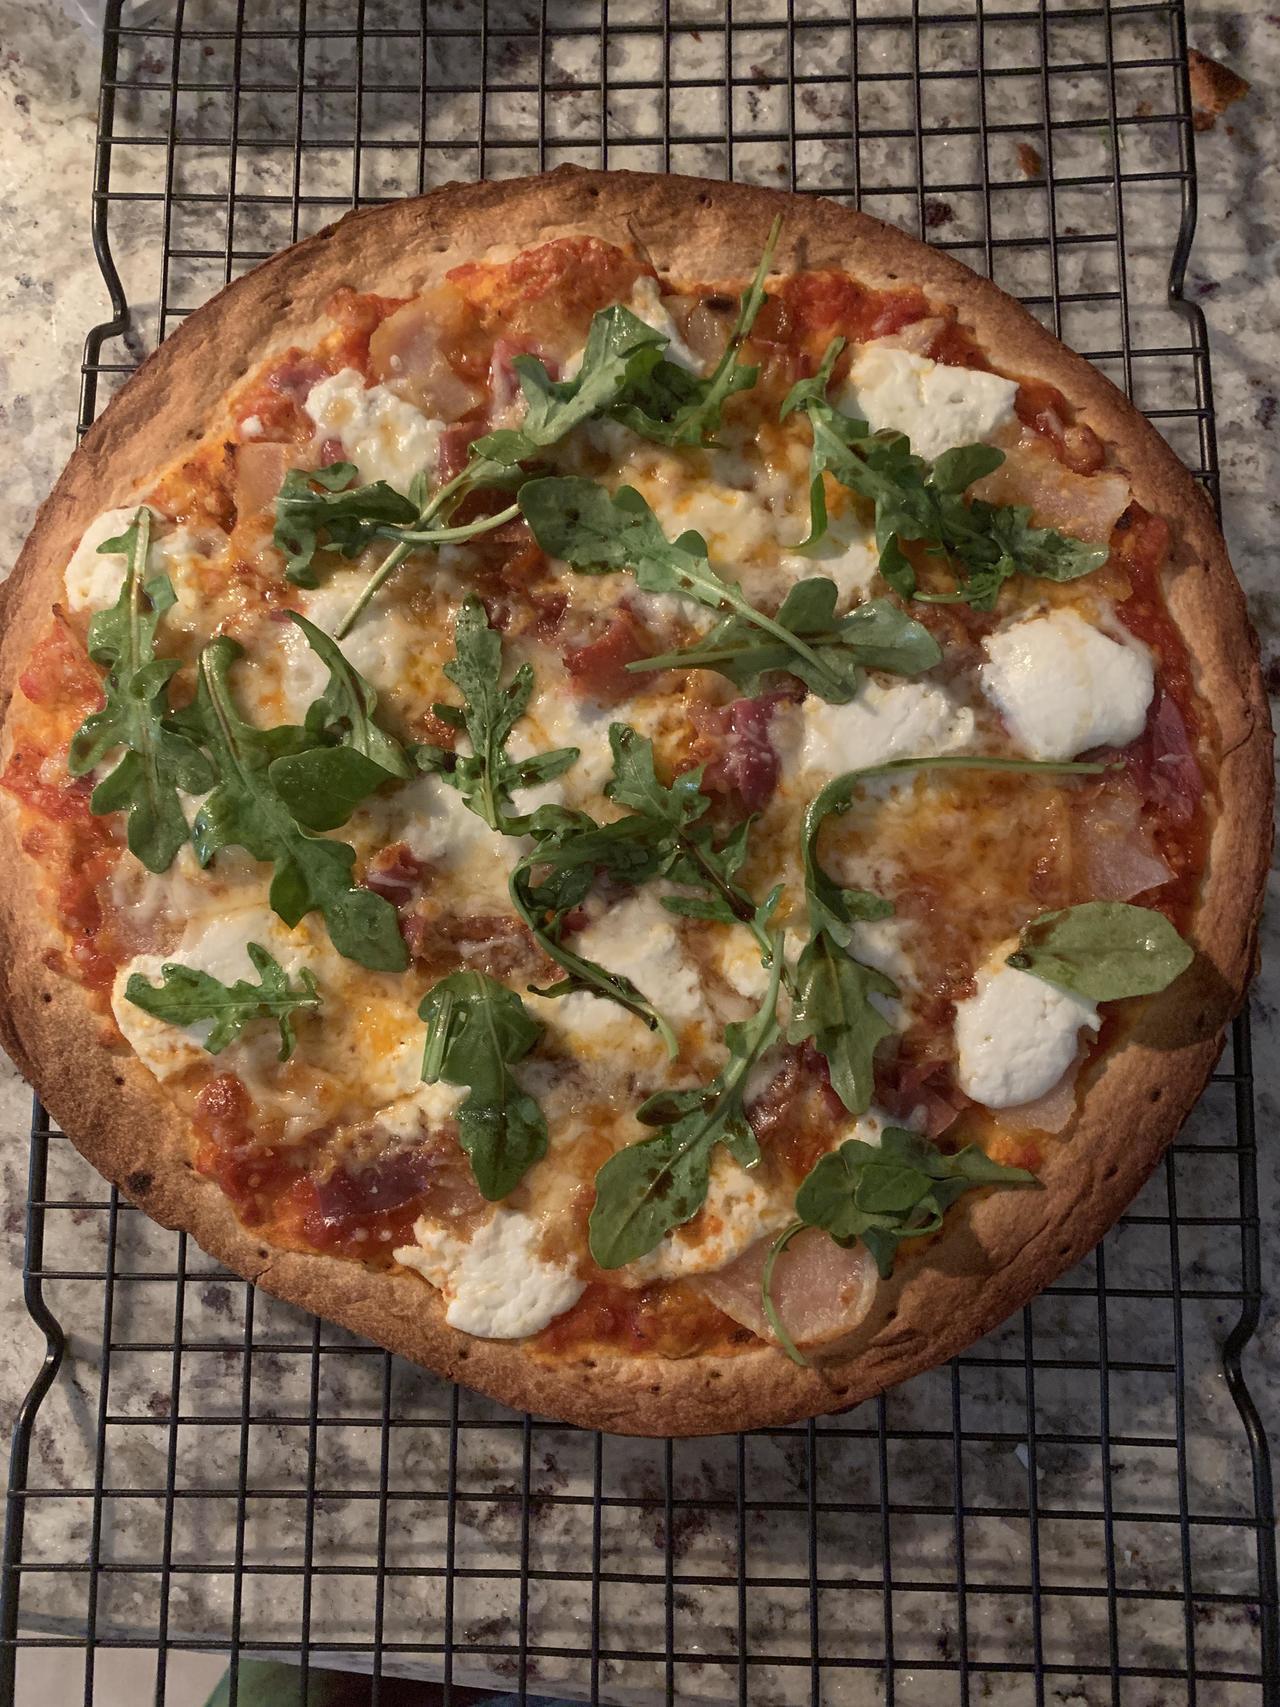 Avocado Boost â€” food-porn-diary: [OC] Pizza with scalloped...